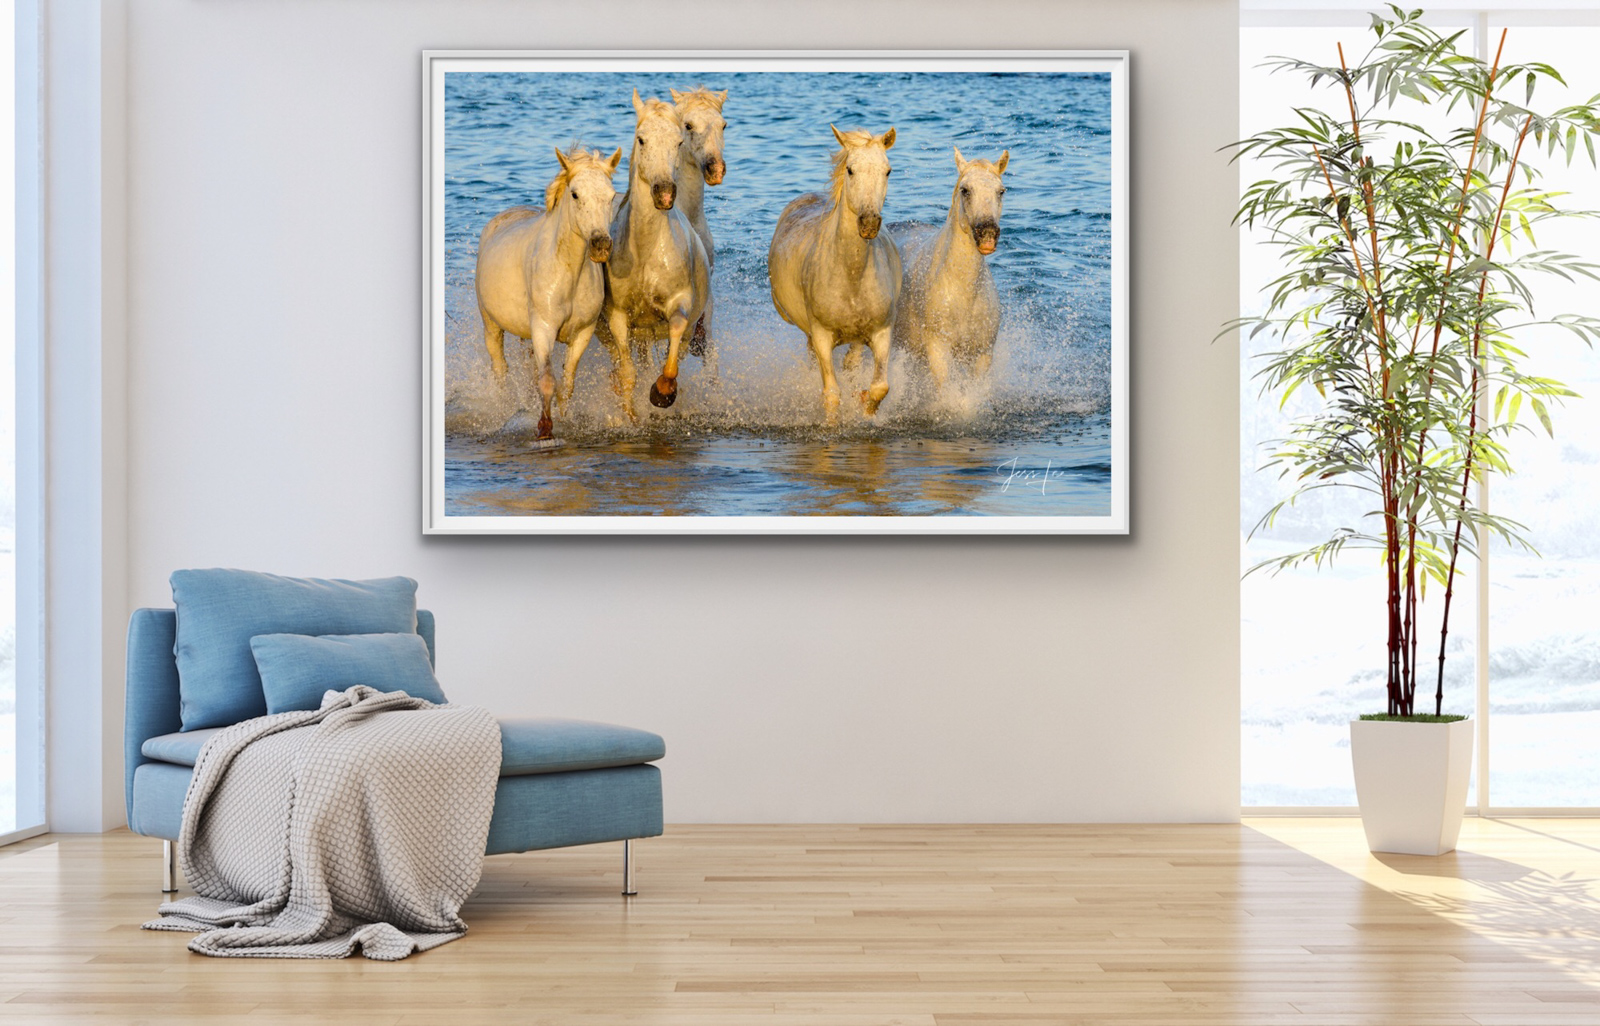 Horse Photography Prints. Pictures are available as Acrylic, Metal, Canvas, or Fine Art Paper limited edition wall art prints...